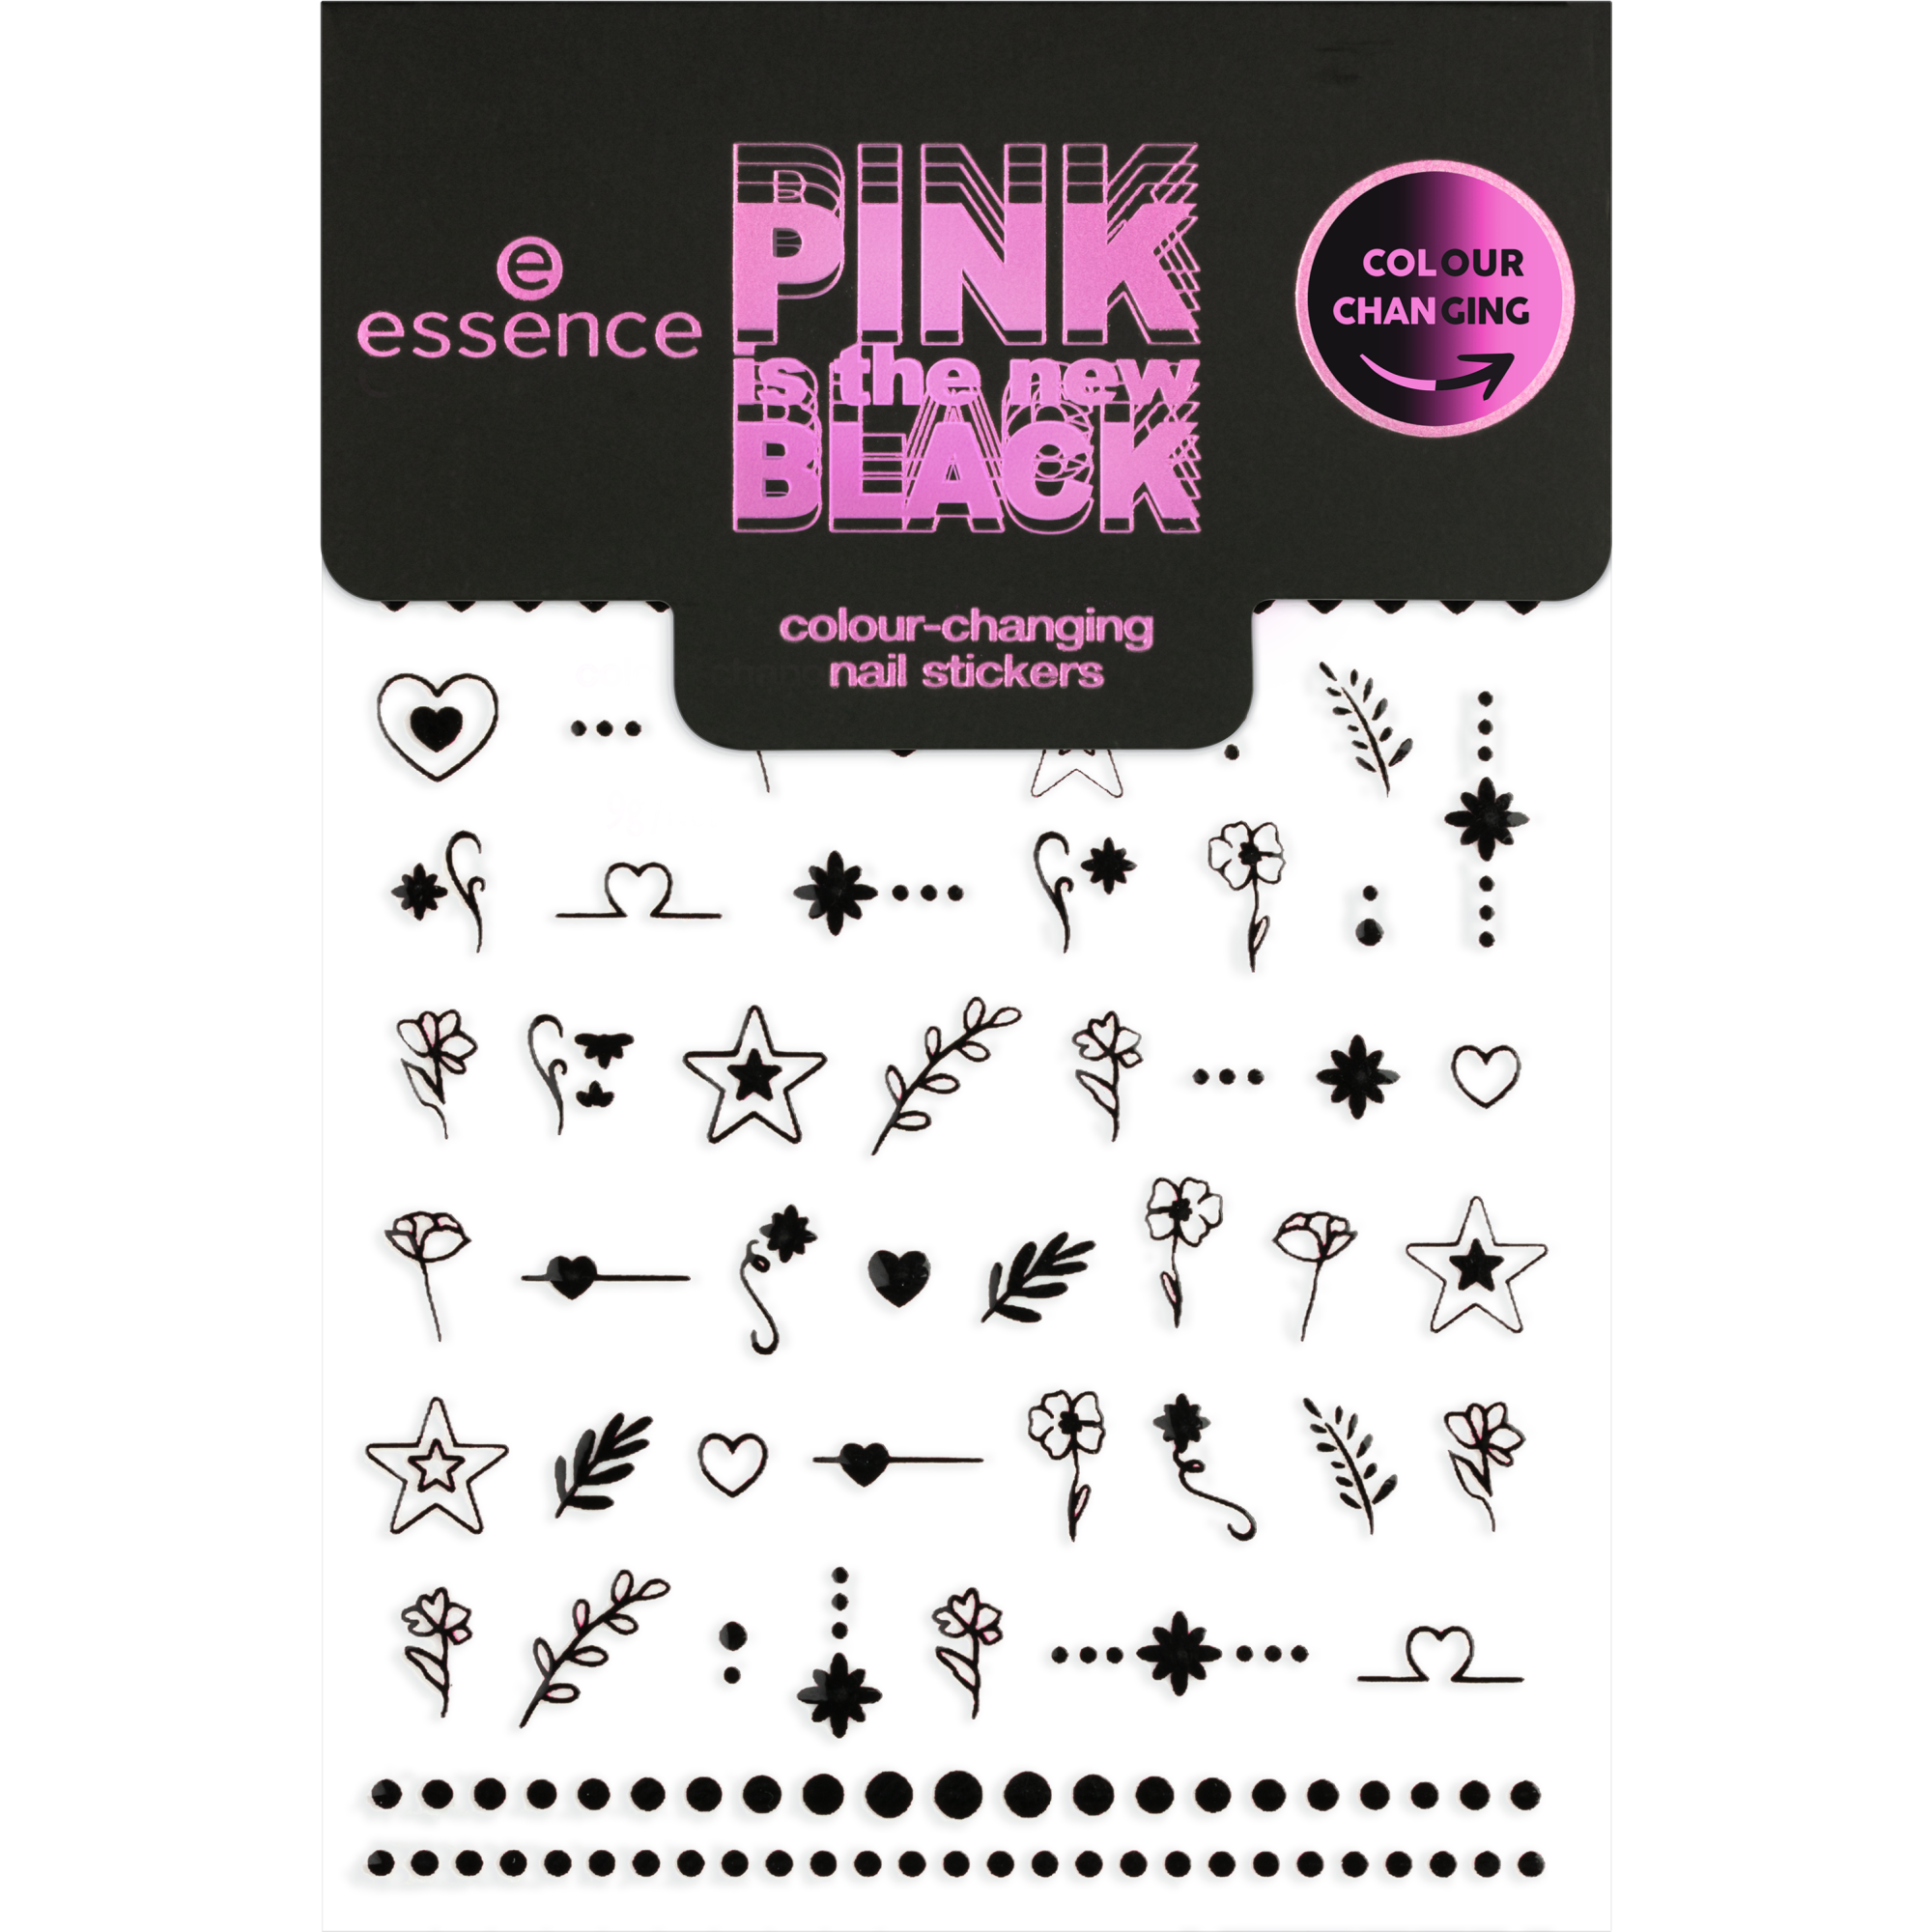 PINK s the new BLACK colour-changing nail stickers